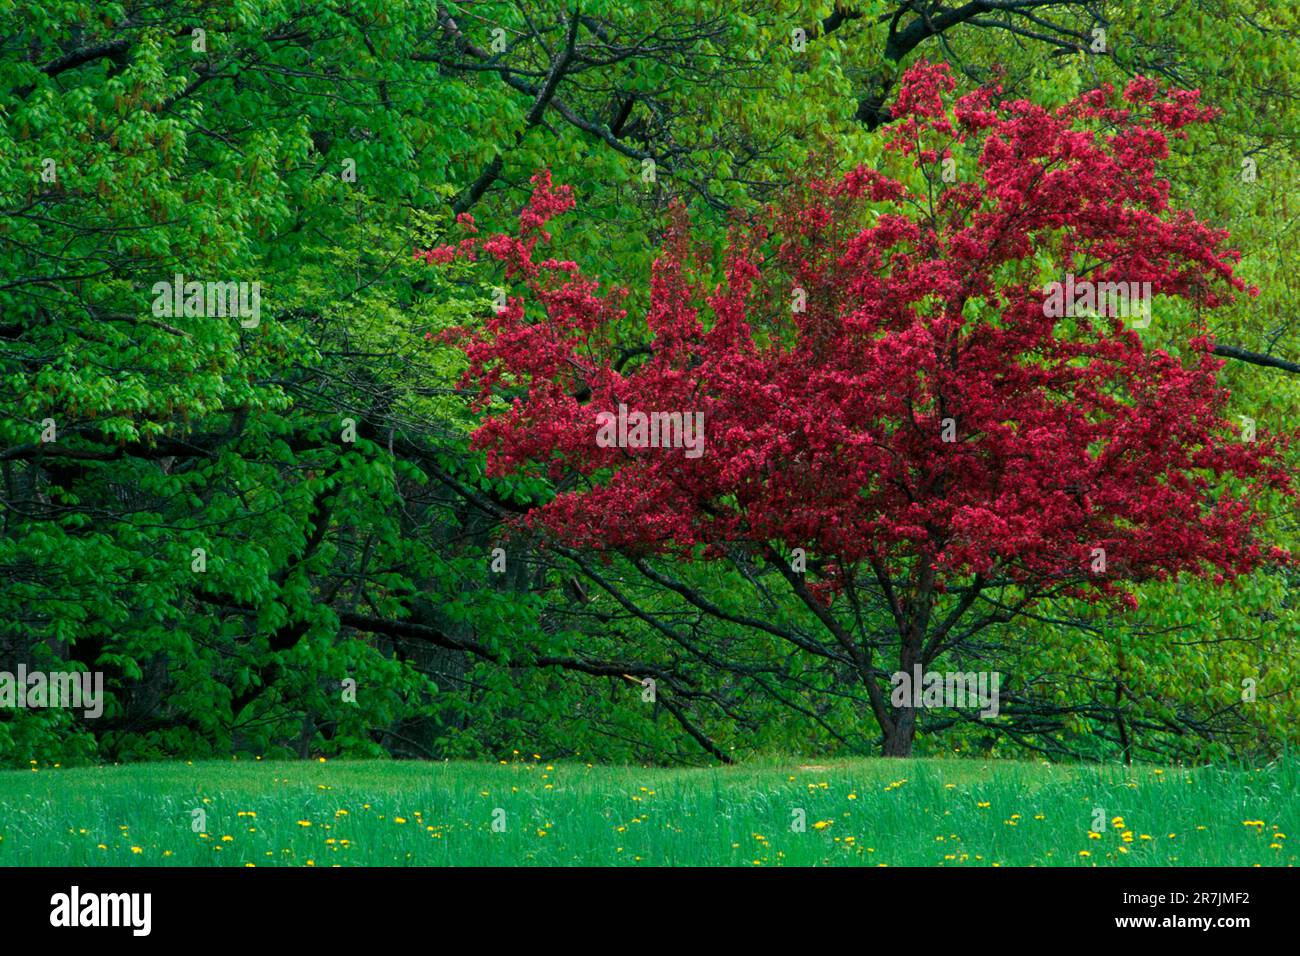 A Flowering Crabapple tree (Malus spp.) is contrasted against bright green spring foliage in Freeport, Maine. Stock Photo